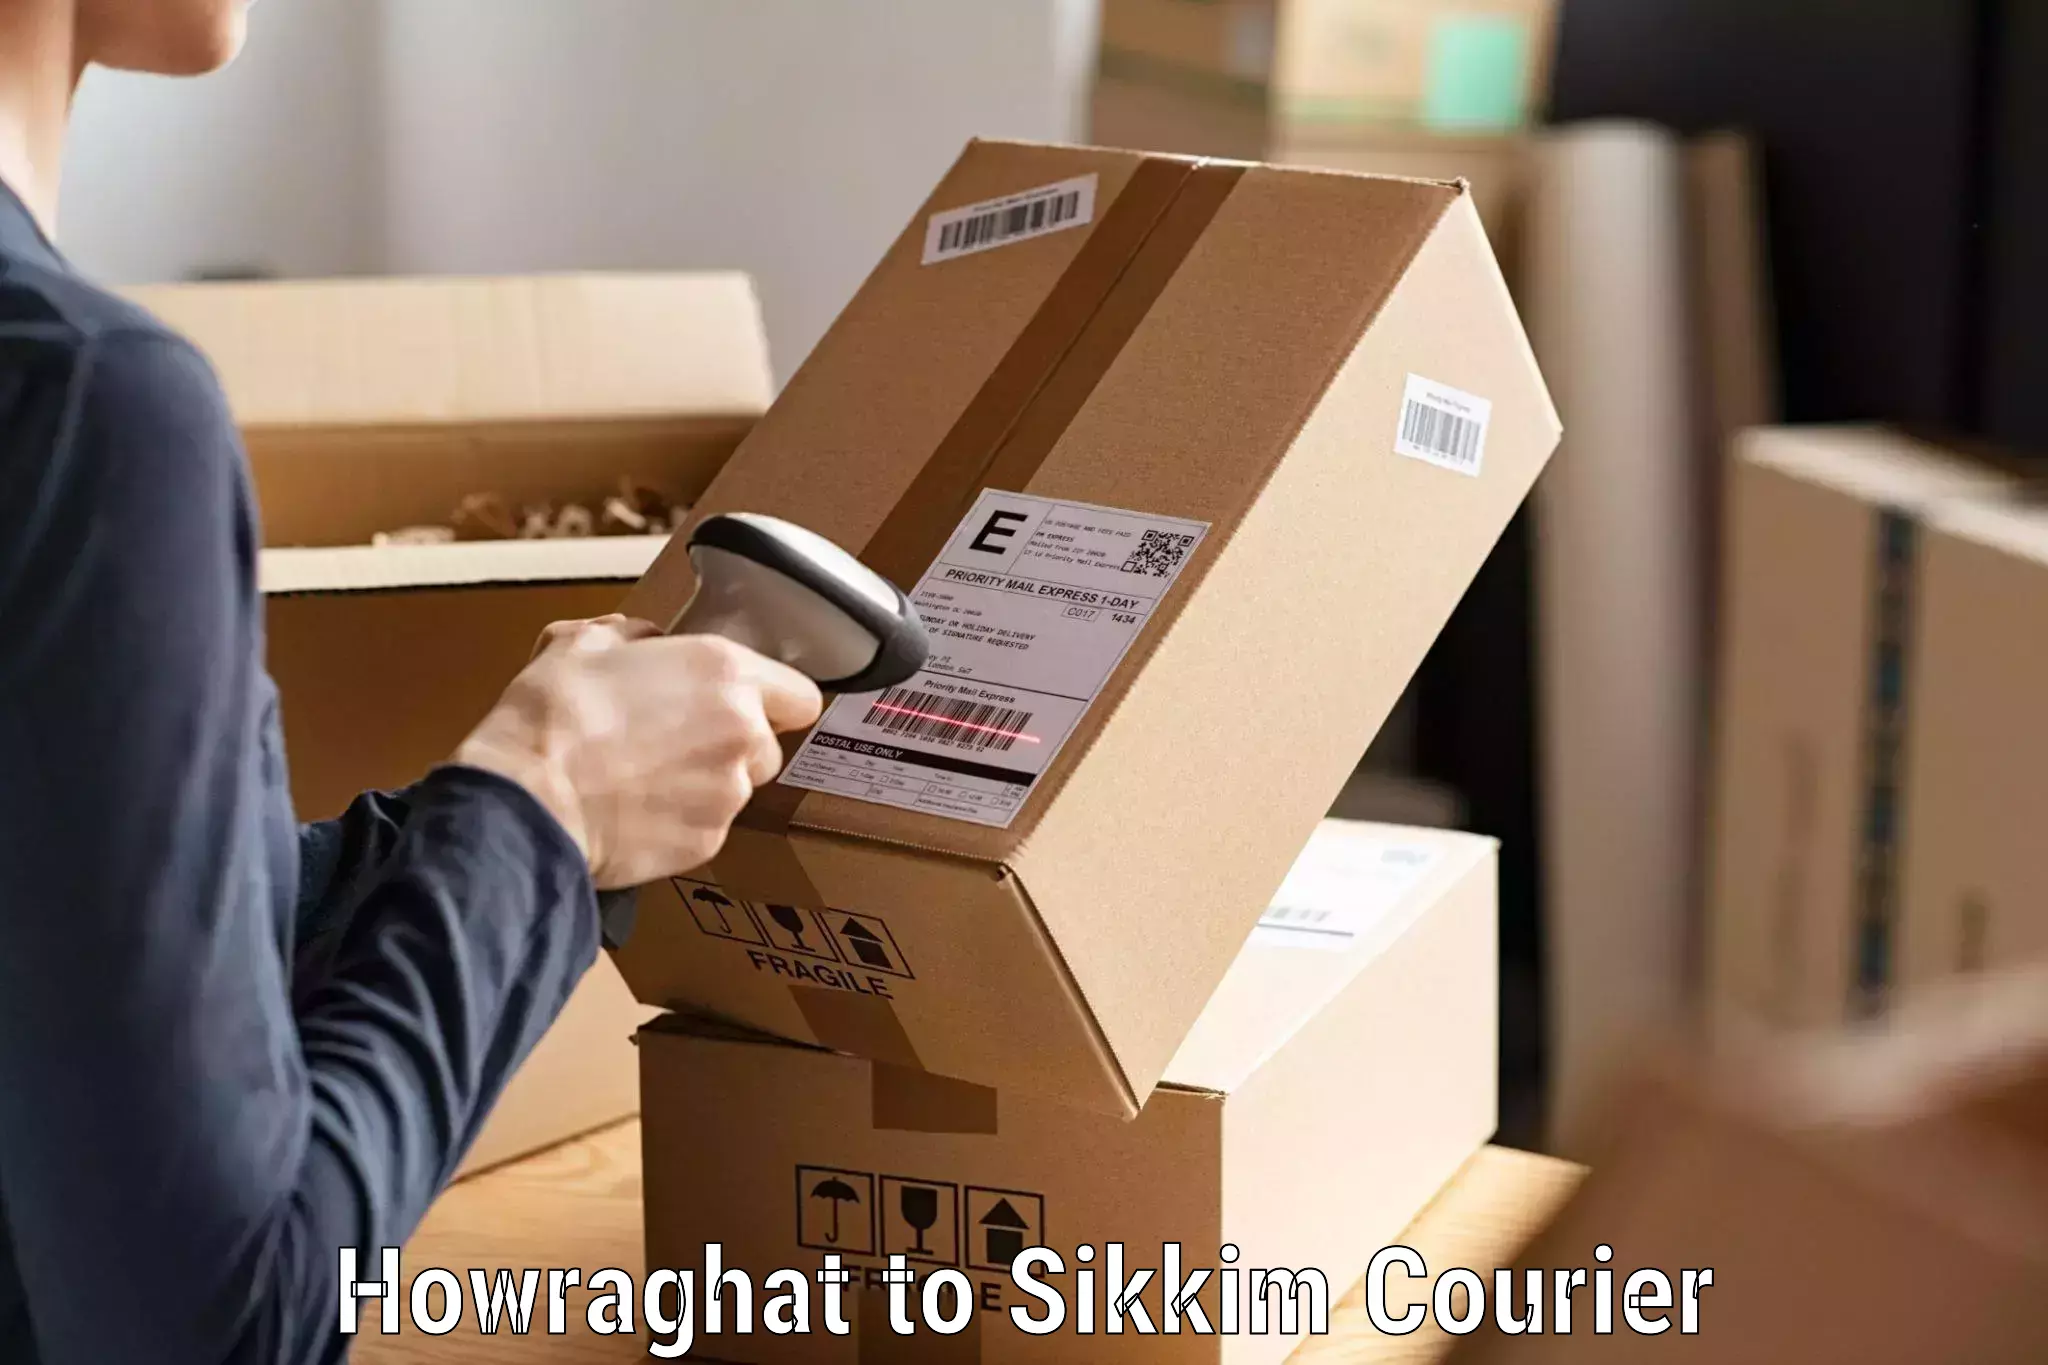 Professional courier handling Howraghat to Rangpo